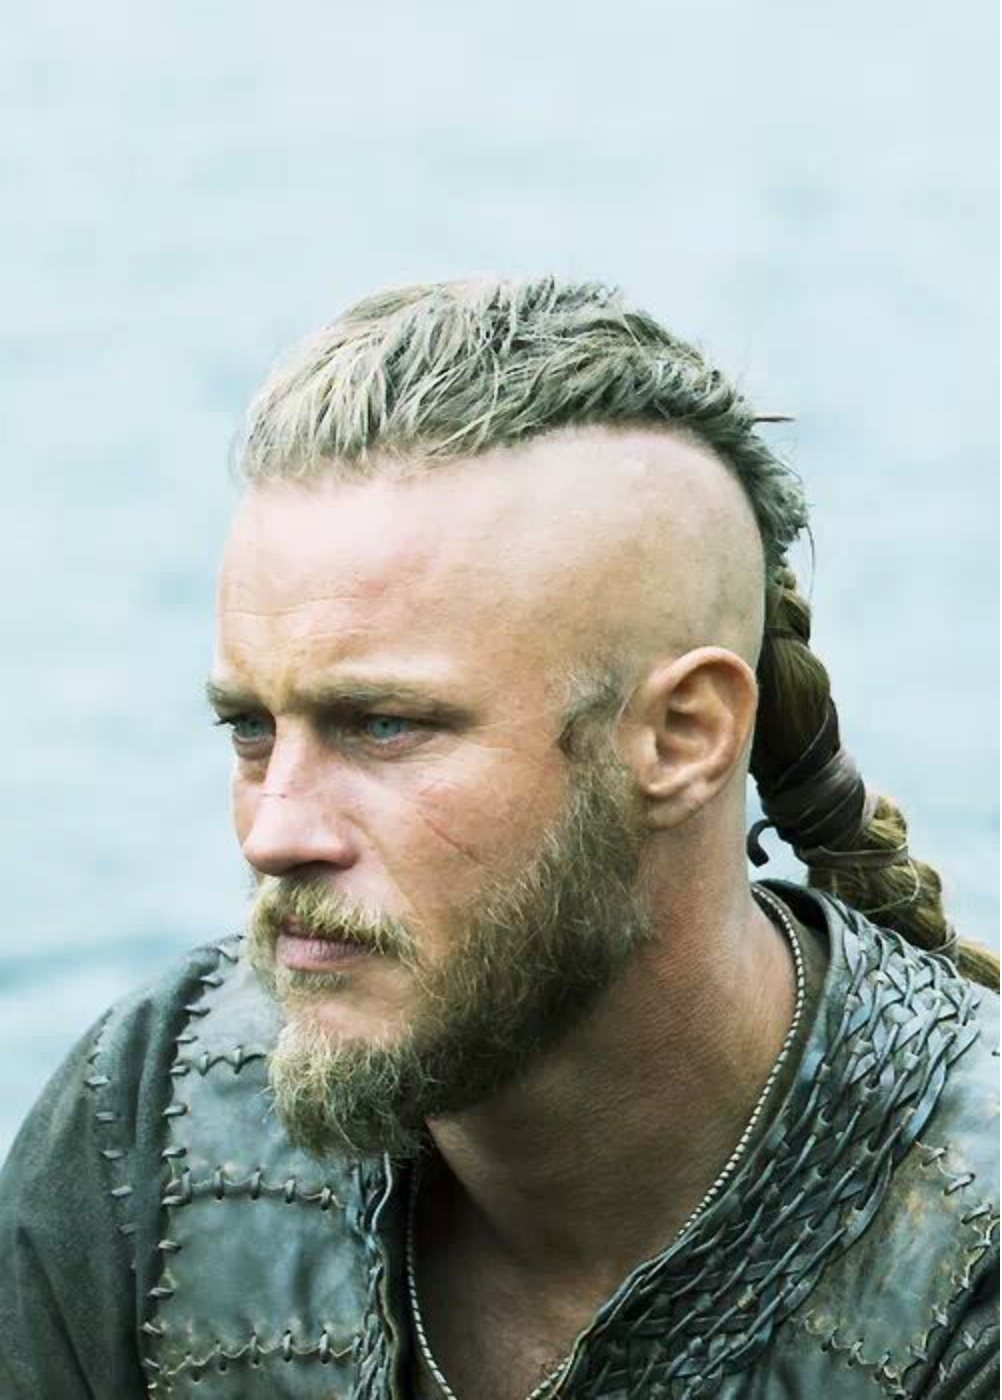 Vikings: The Most Impressive Hairstyles, Ranked